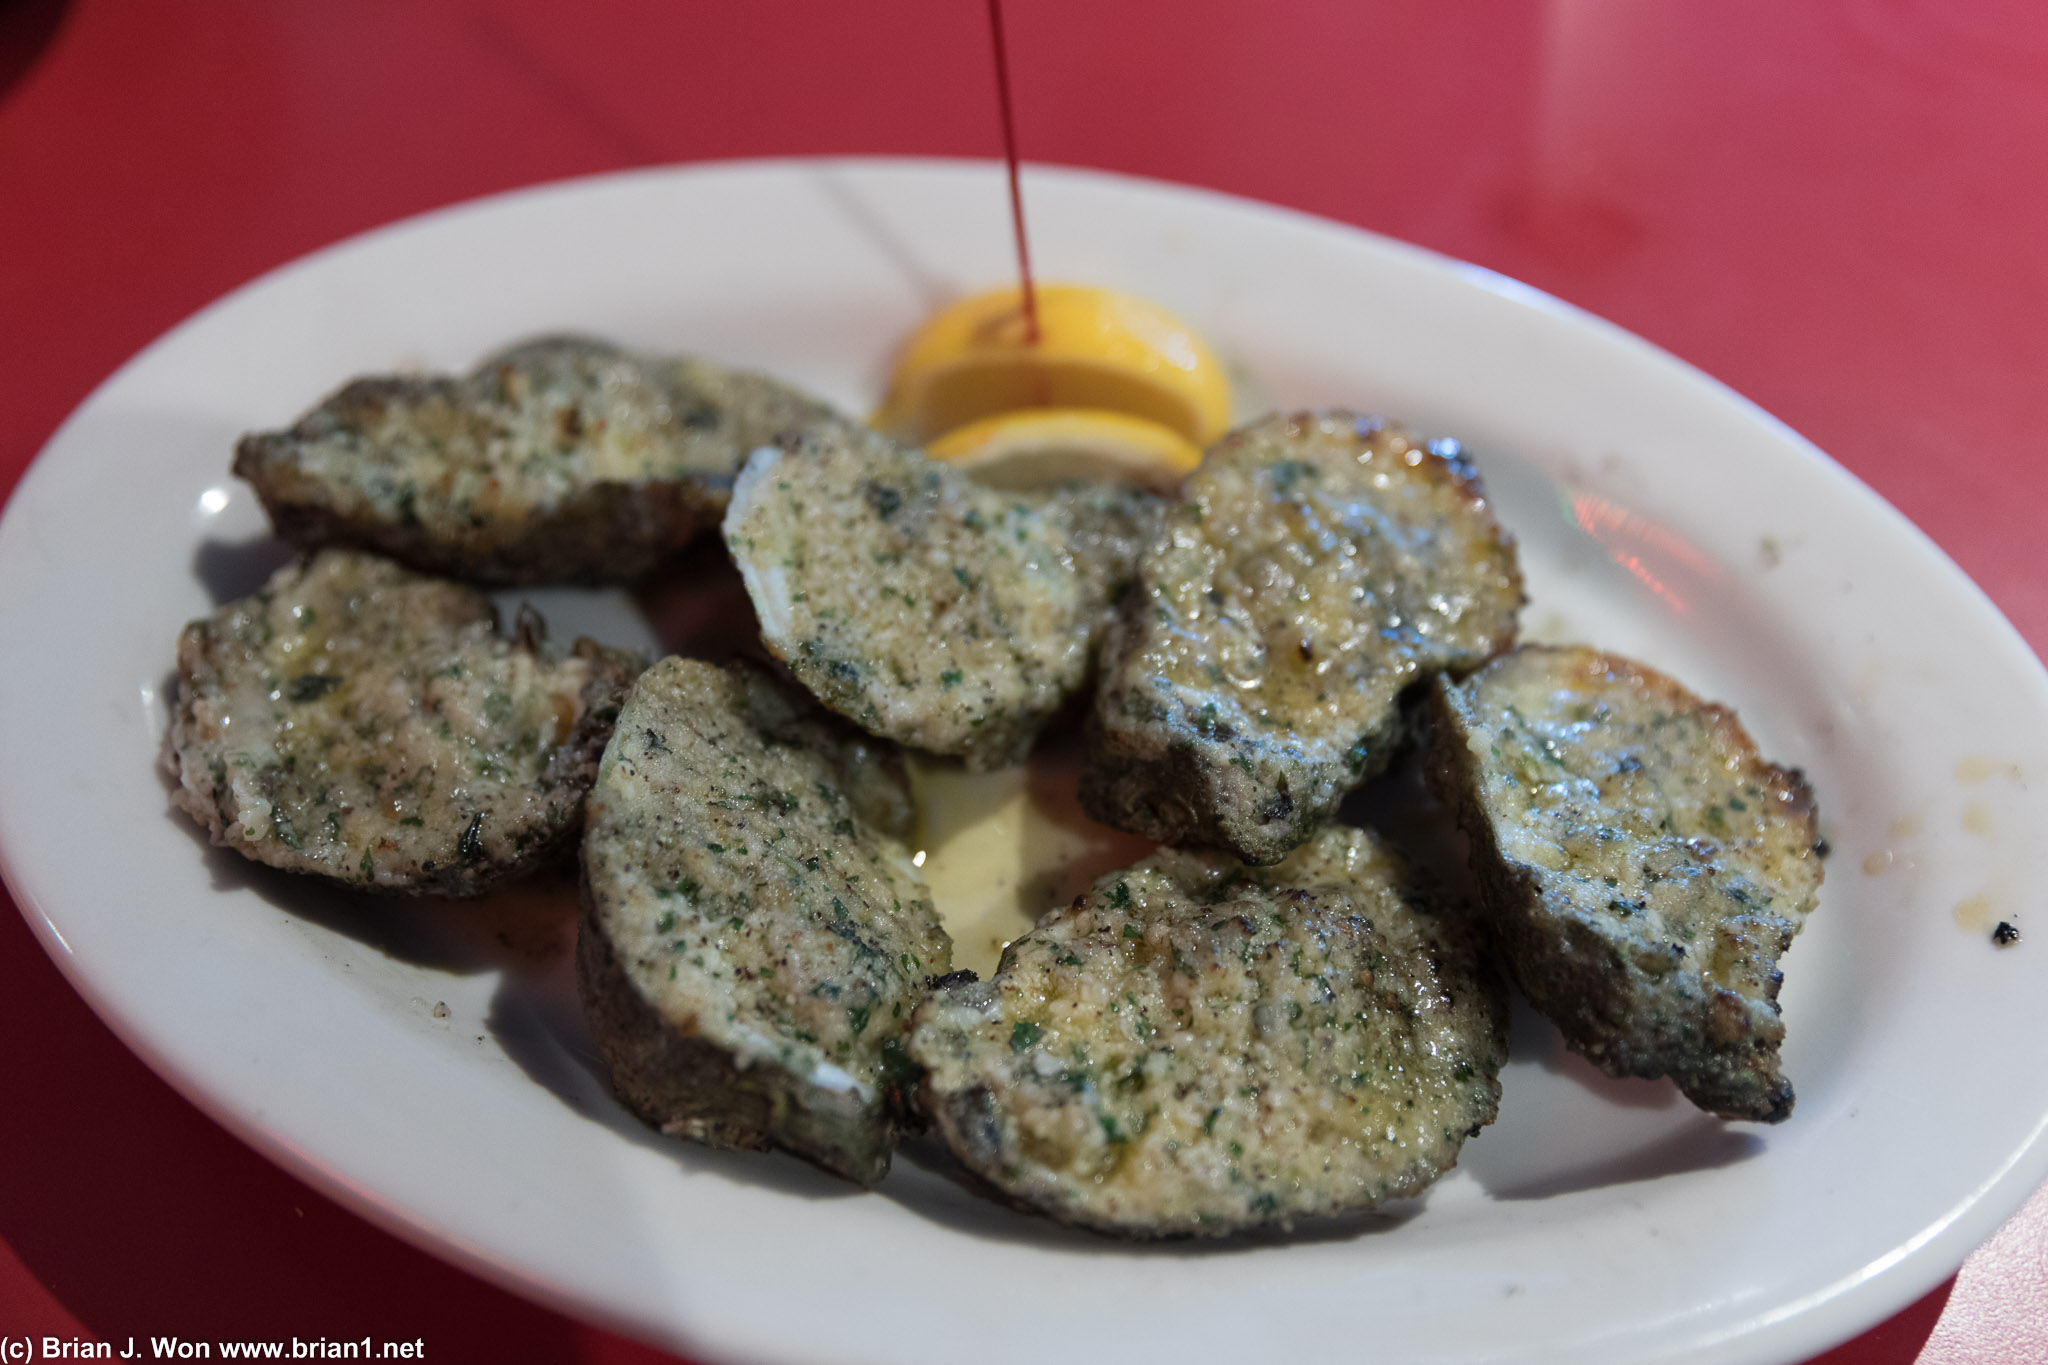 Chargrilled oysters. Not as good as Felix's in New Orleans.